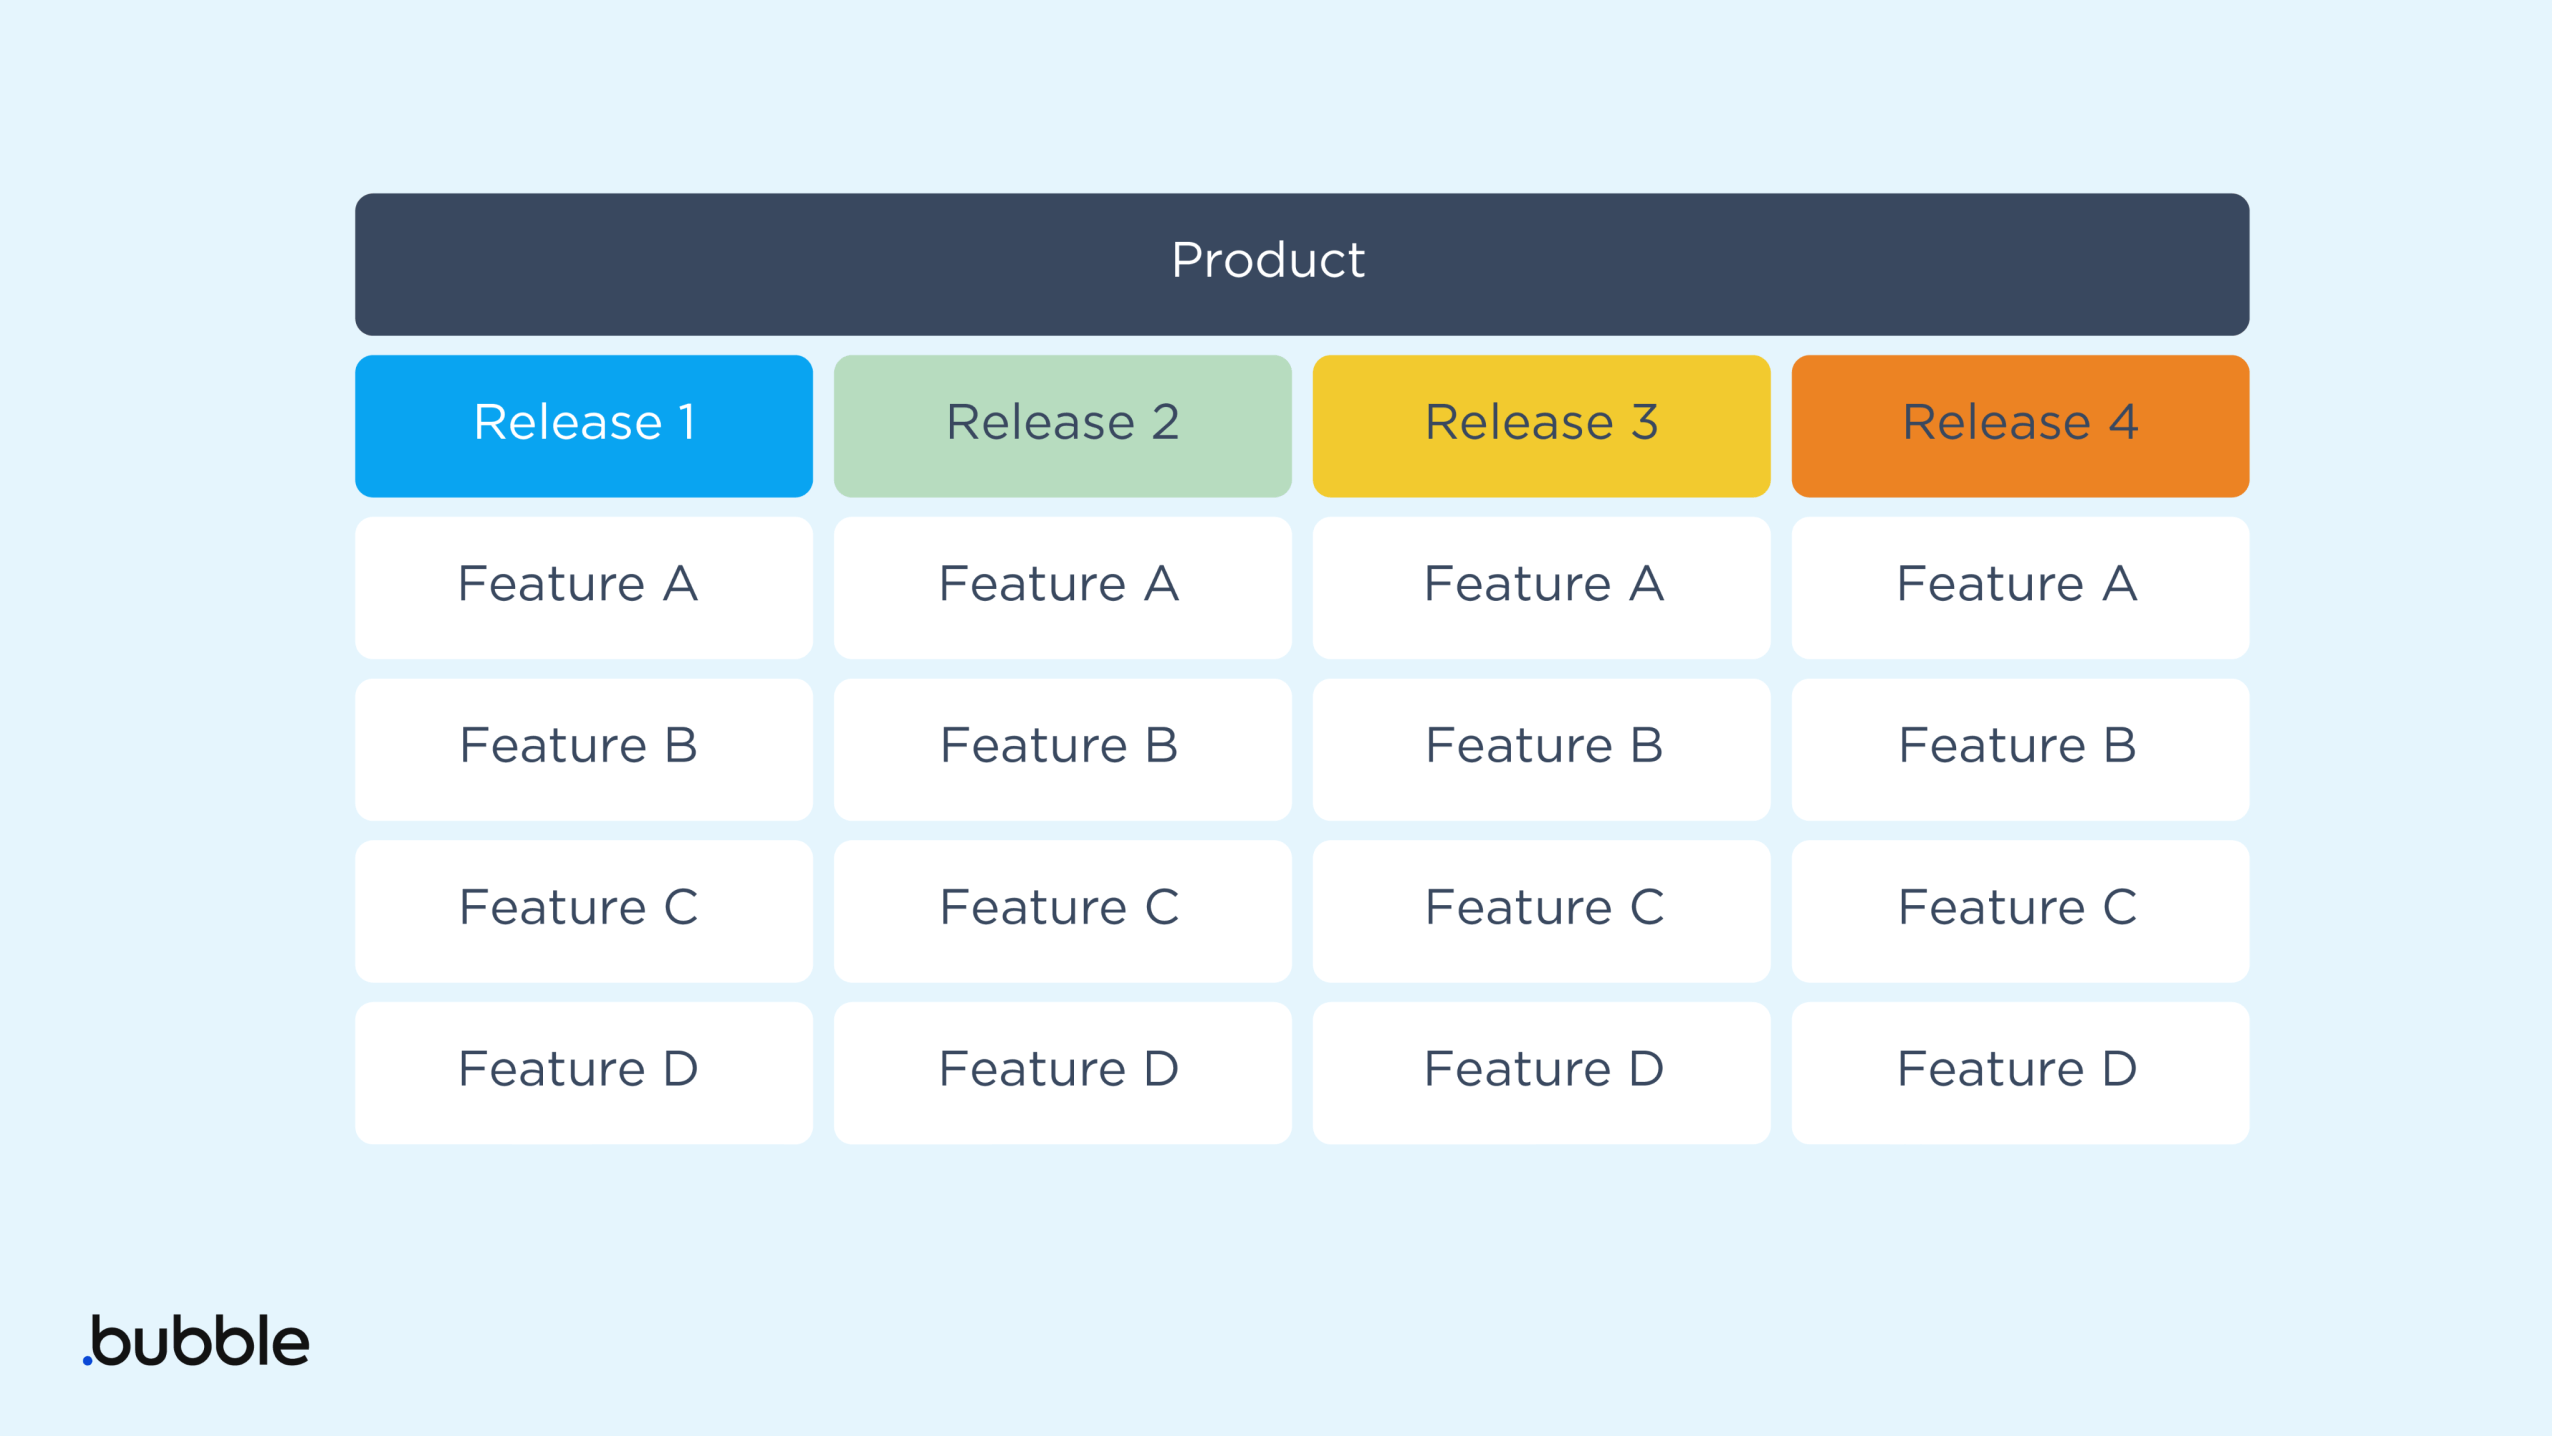 An example tempalte of a features-based product roadmap